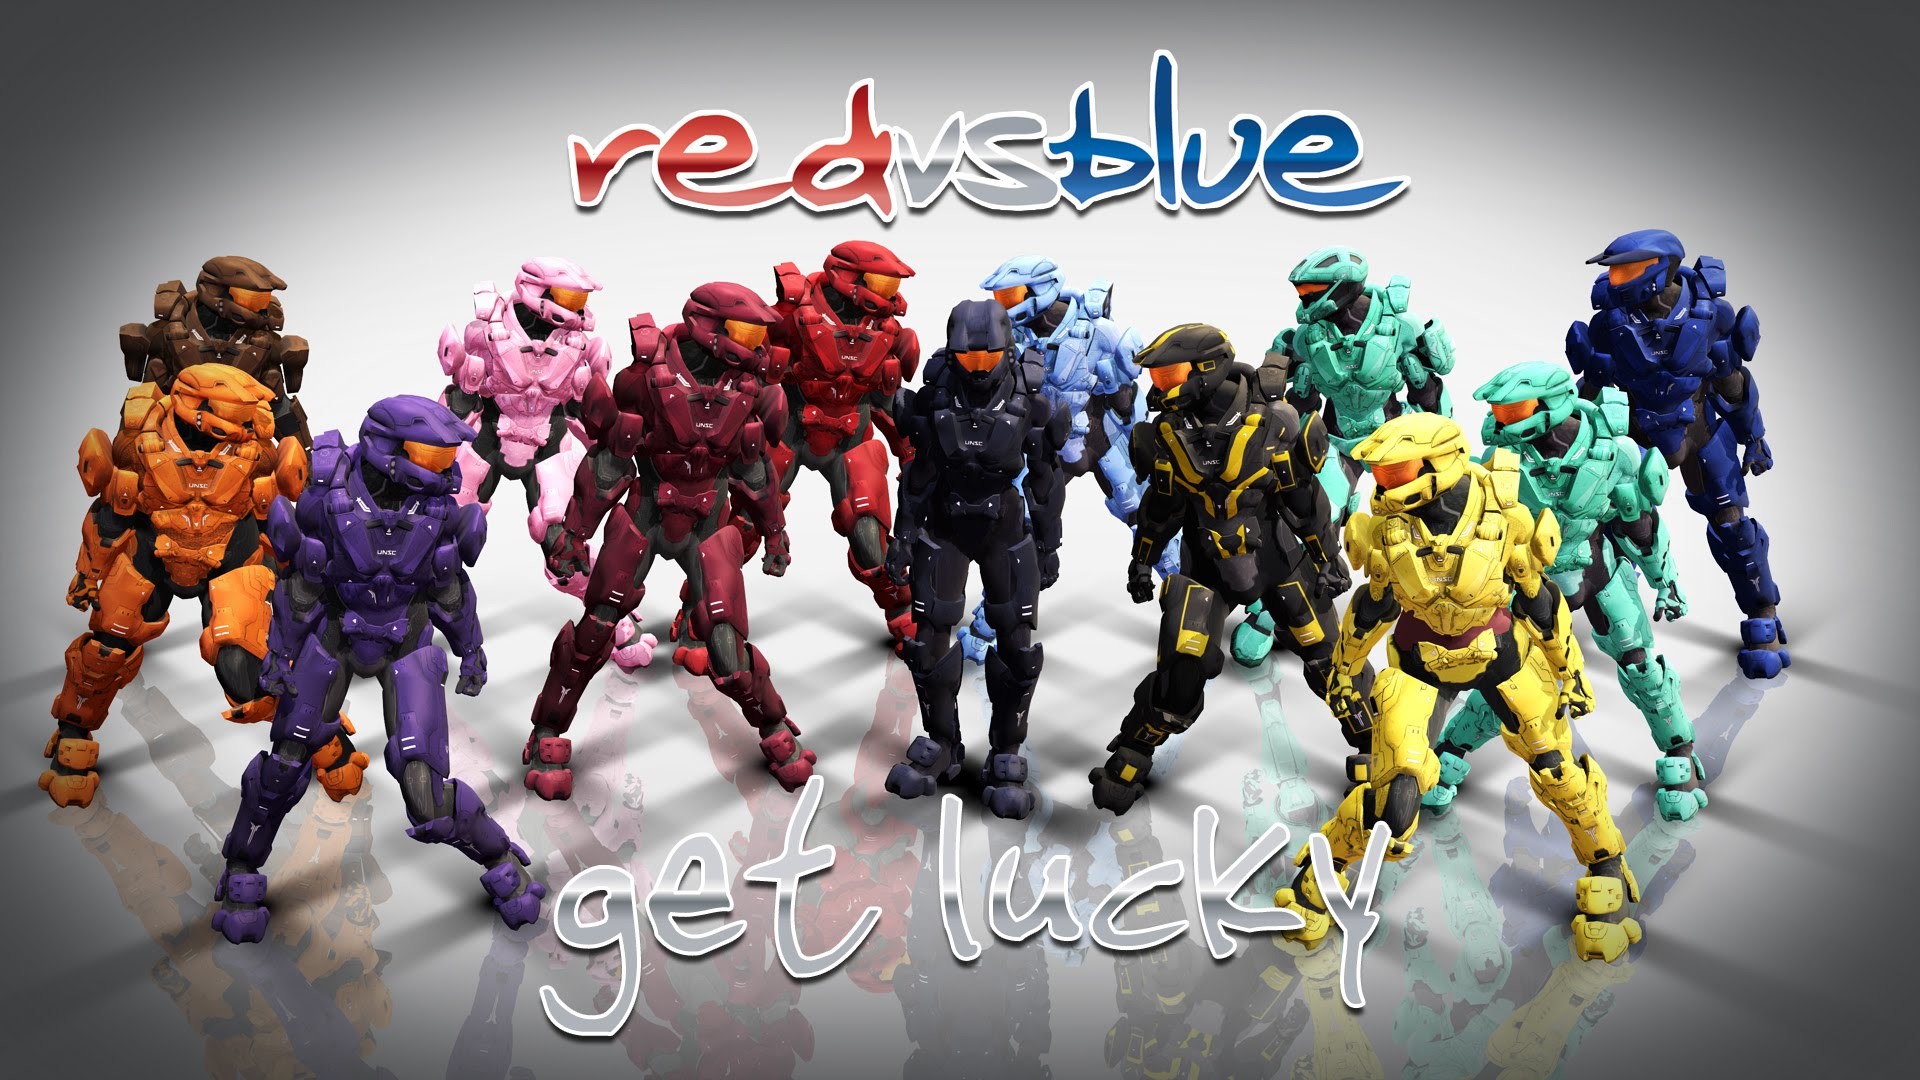 1920x1080 [MMD] Red vs. Blue - Get Lucky - YouTube